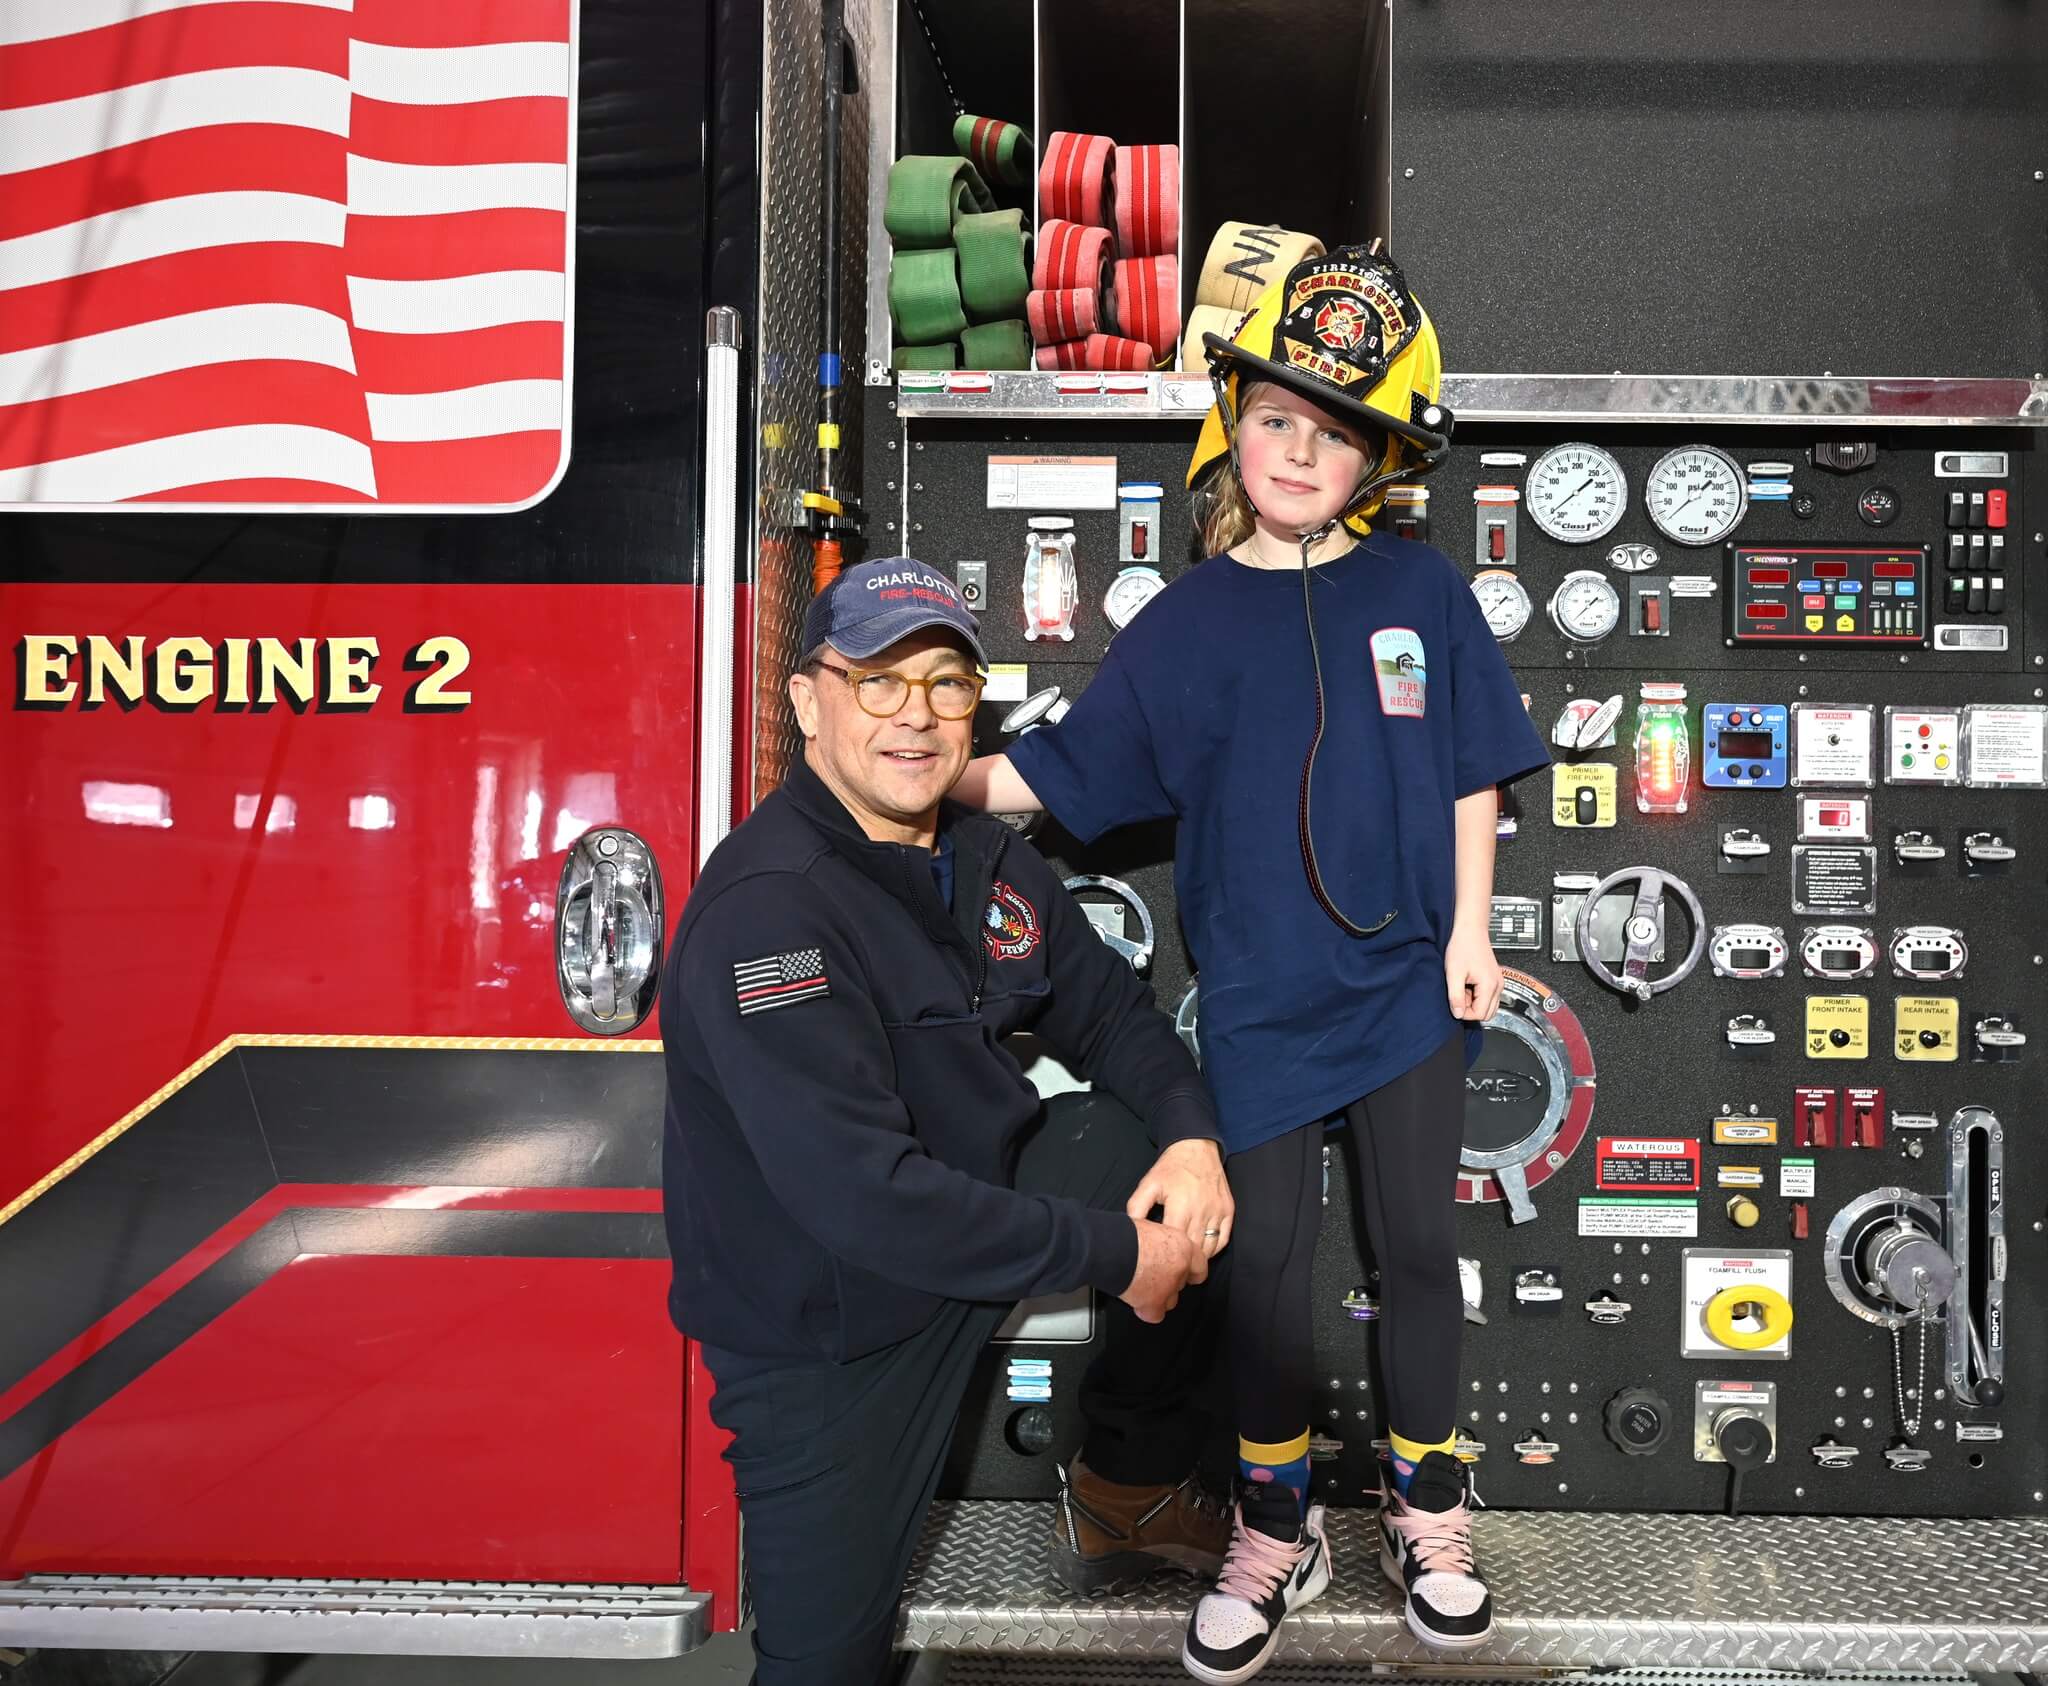 Photo by Lee Krohn.
Carter models a fire helmet for her father Robert Caldwell at the Charlotte Volunteer Fire and Rescue Service’s open house 1-4 p.m. last Saturday, Feb. 24.